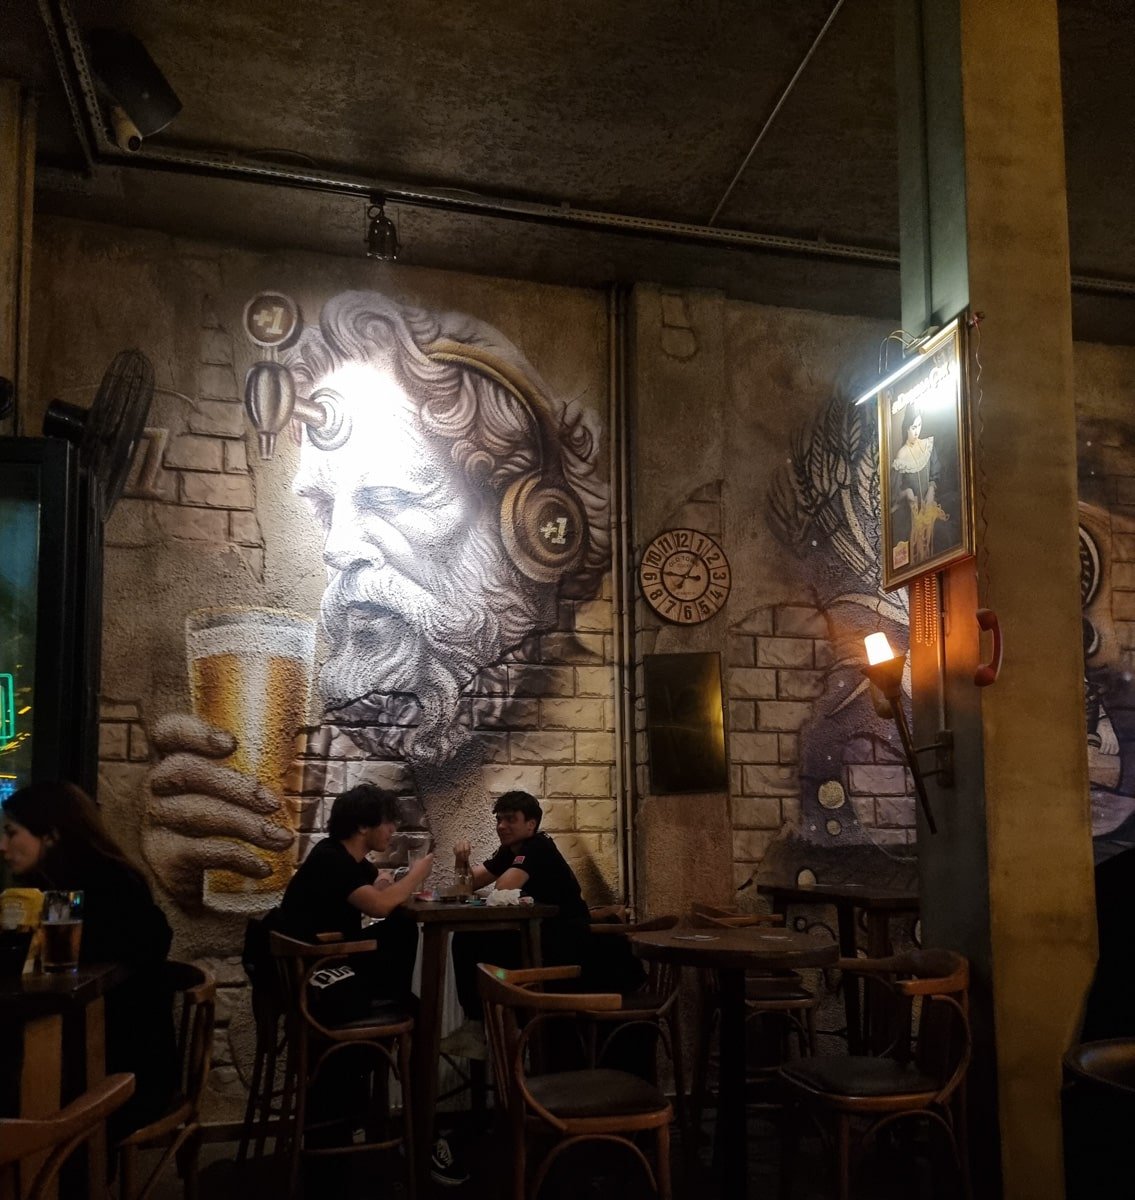 Two people sit at a wooden table in a dimly lit pub with a large mural of a bearded man holding a beer on the wall behind them, reminiscent of scenes from *A Guide to Kadikoy Istanbul*.